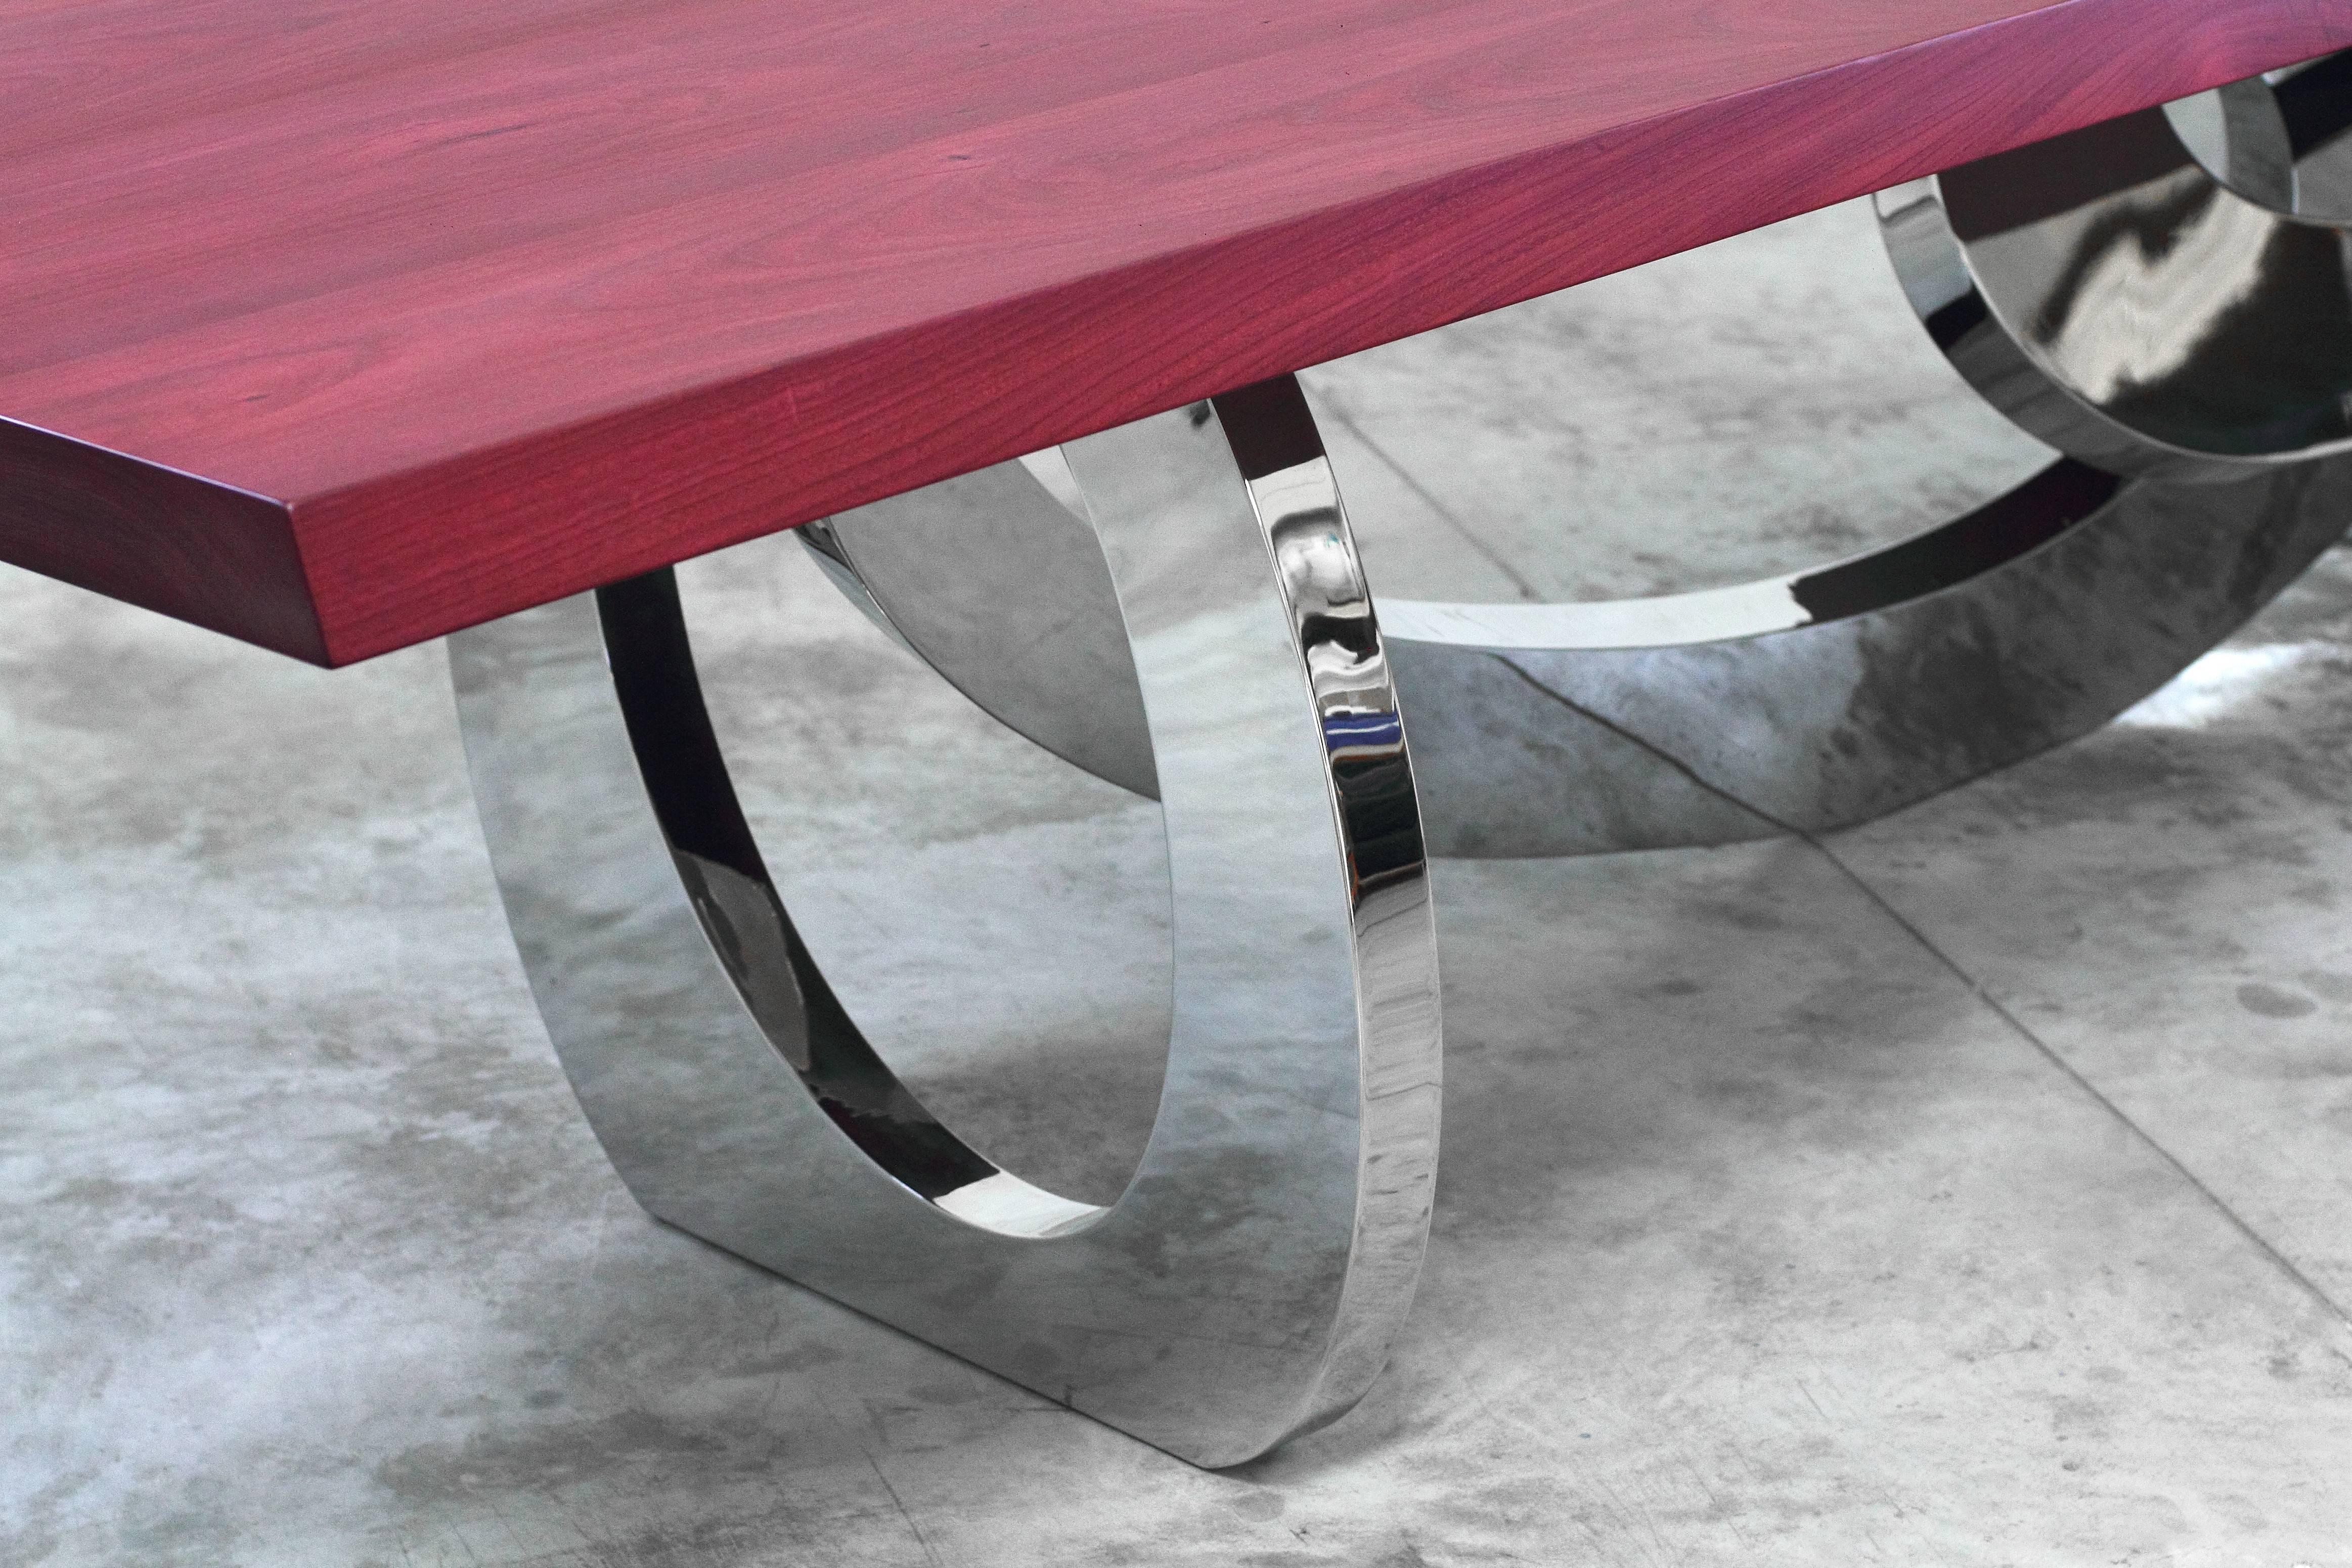 Modern Dining Table Spiegel Stahl Ringe Basis Solid Wood Magenta Top Made in Italy im Zustand „Neu“ im Angebot in Ancona, Marche